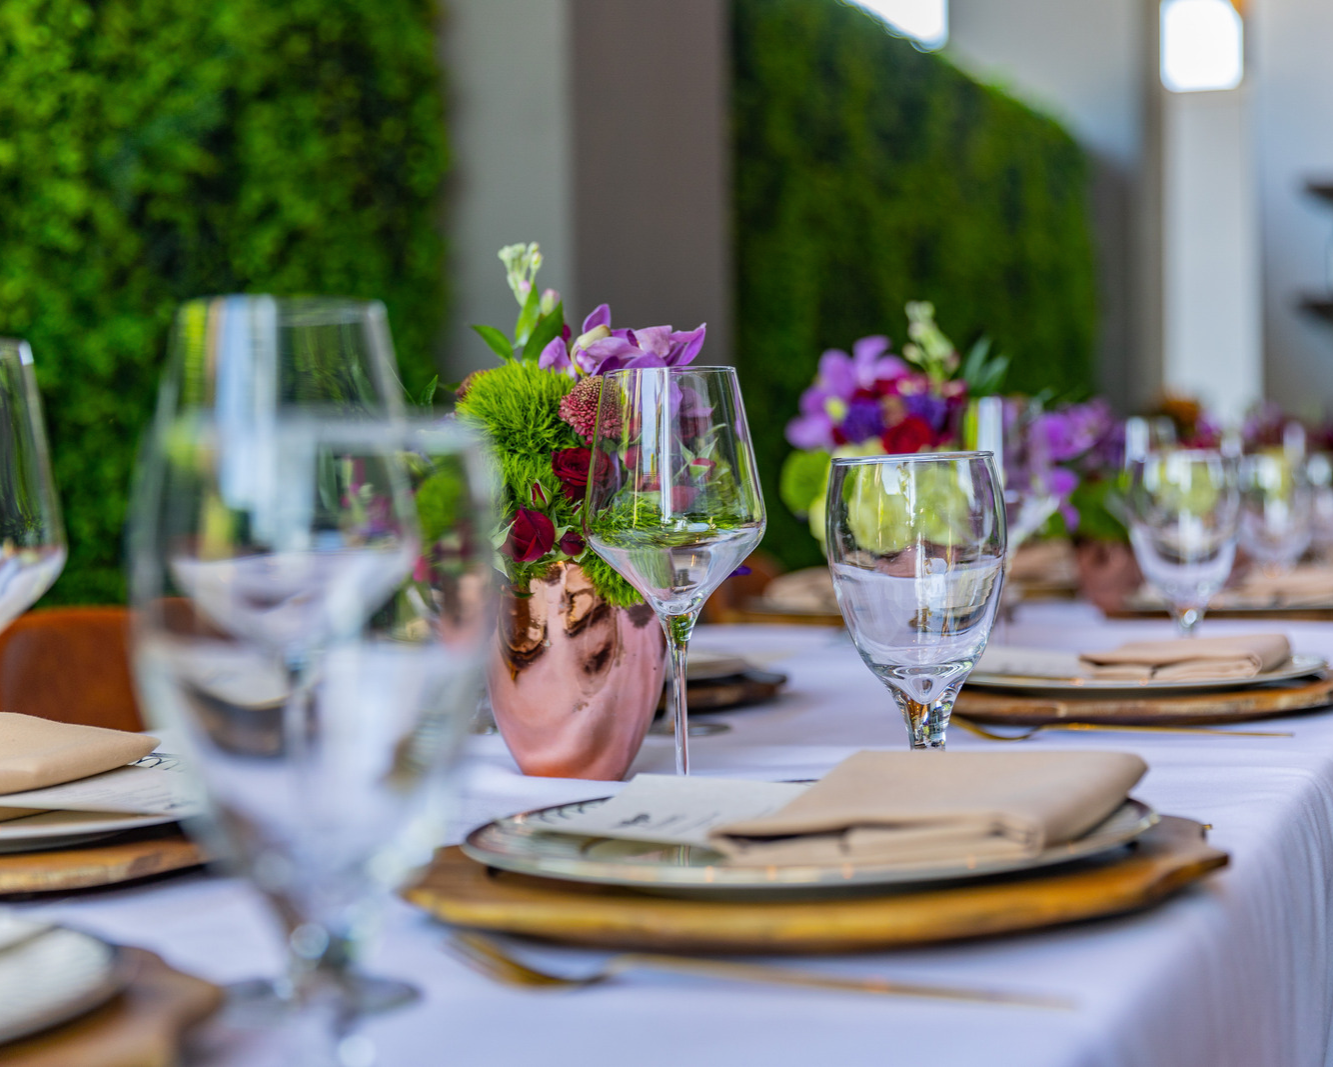 Closeup view of the table layout in the Miami, FL Wine Garden outdoor dining space